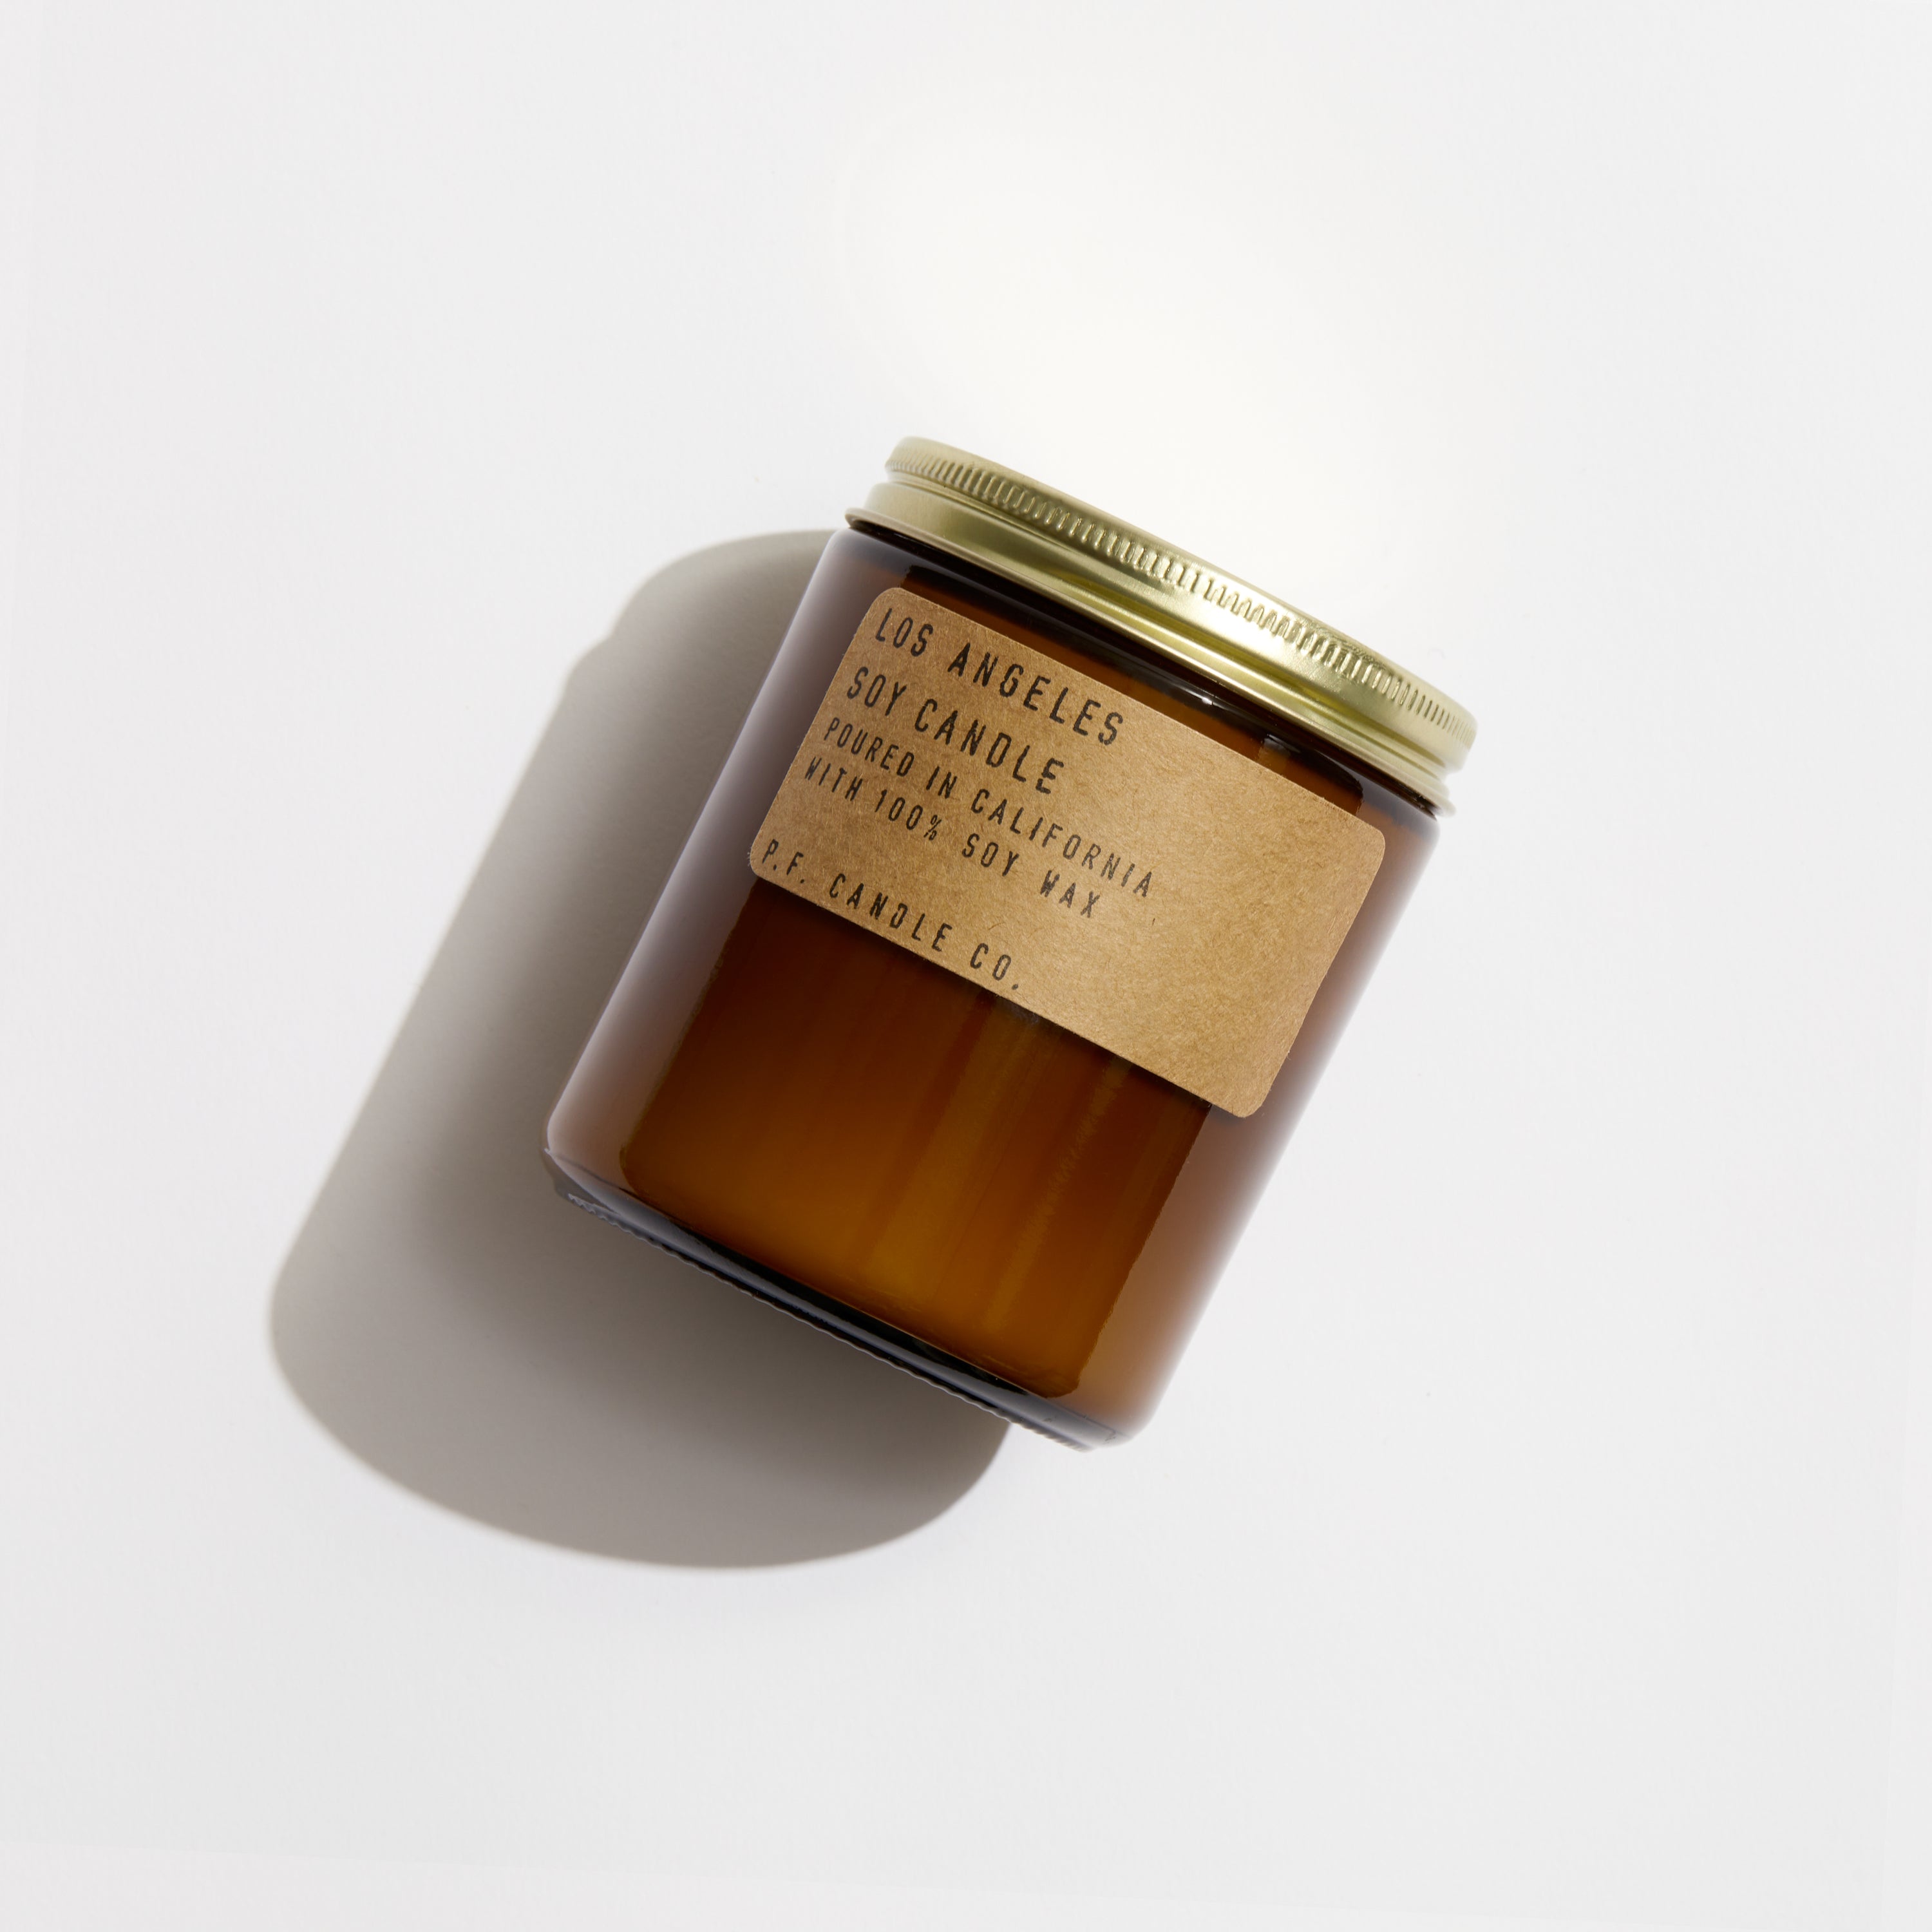 Los Angeles - 7.2 oz Soy Candle